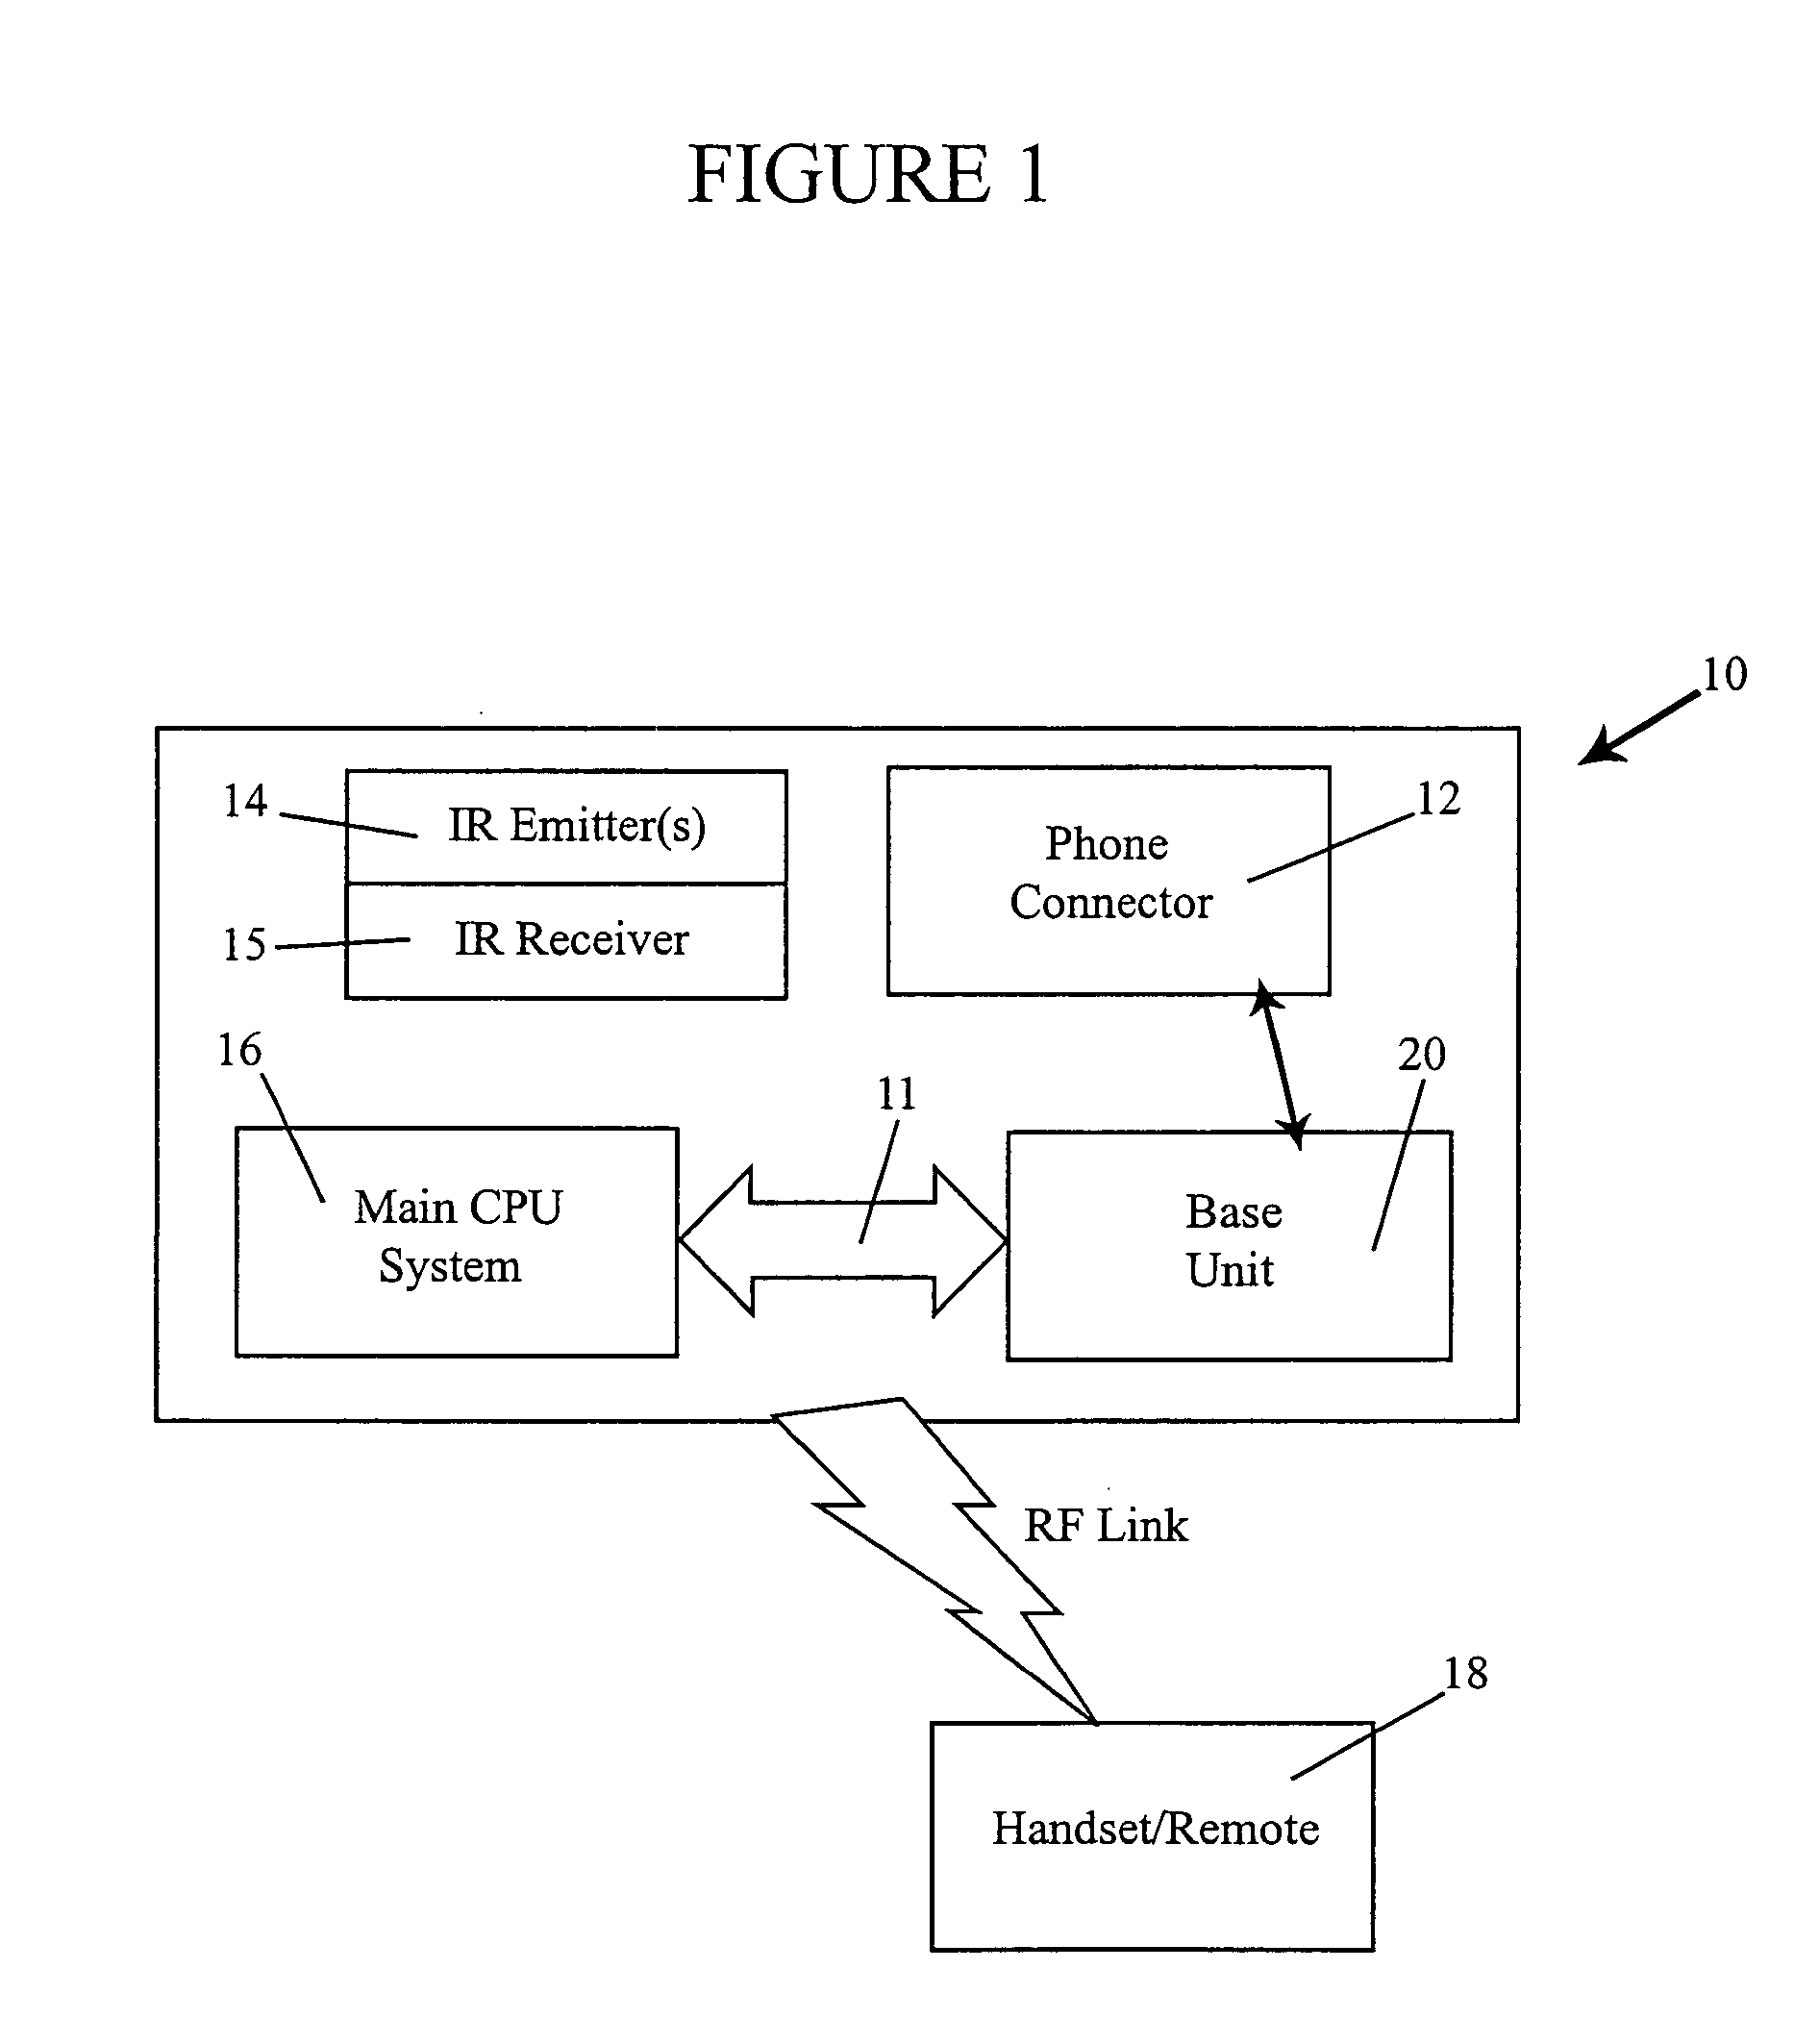 Radio frequency remote control apparatus and methodology